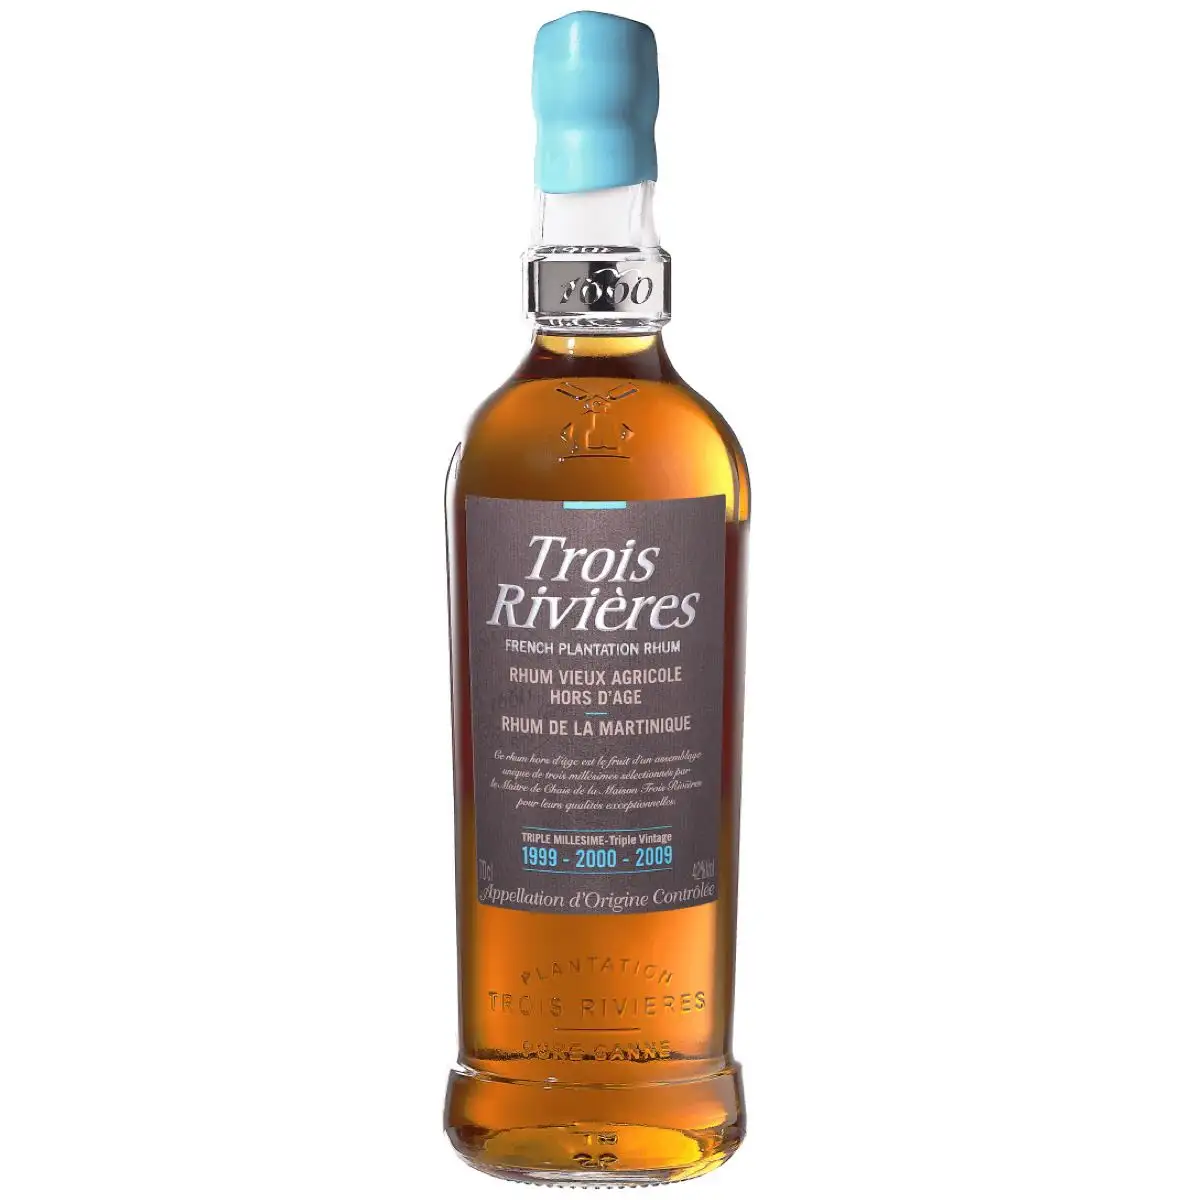 Image of the front of the bottle of the rum Triple Millésime 1999-2000-2009